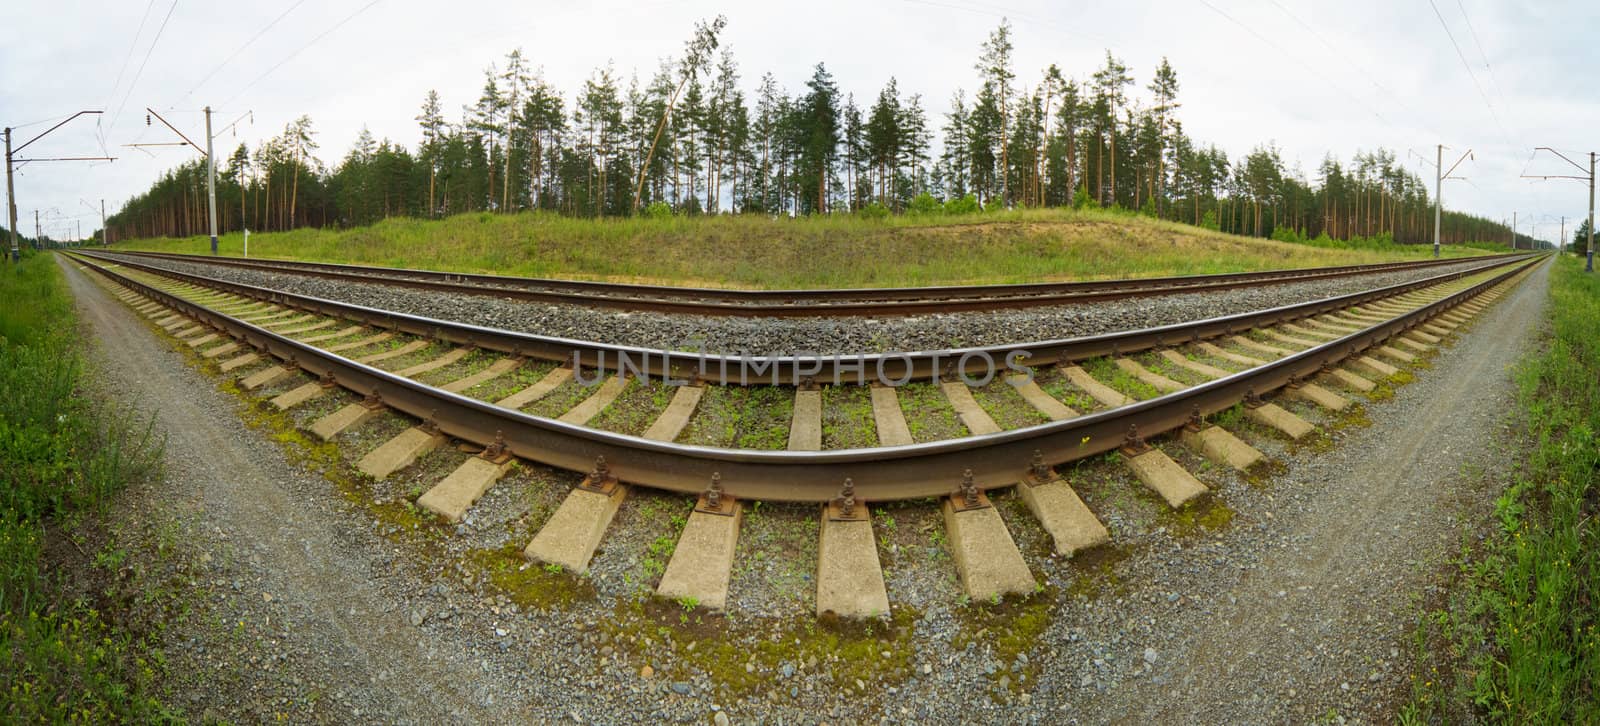 Wide-angle panoramic photo of railroad tracks by pzaxe